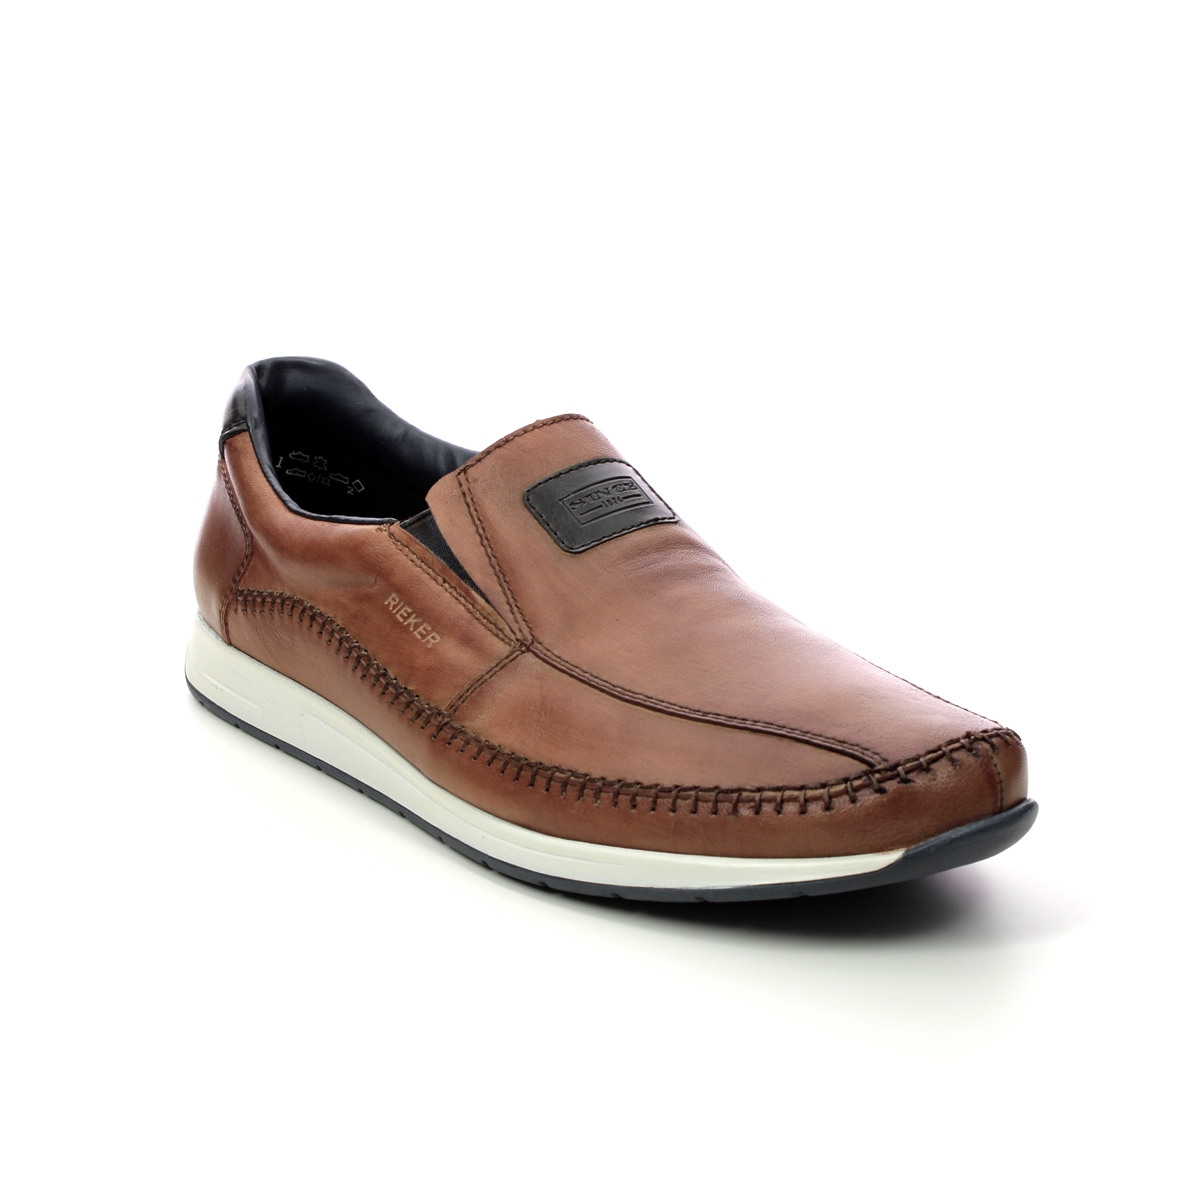 Rieker Slowslip Tan Leather Mens Slip-On Shoes 11962-25 In Size 44 In Plain Tan Leather